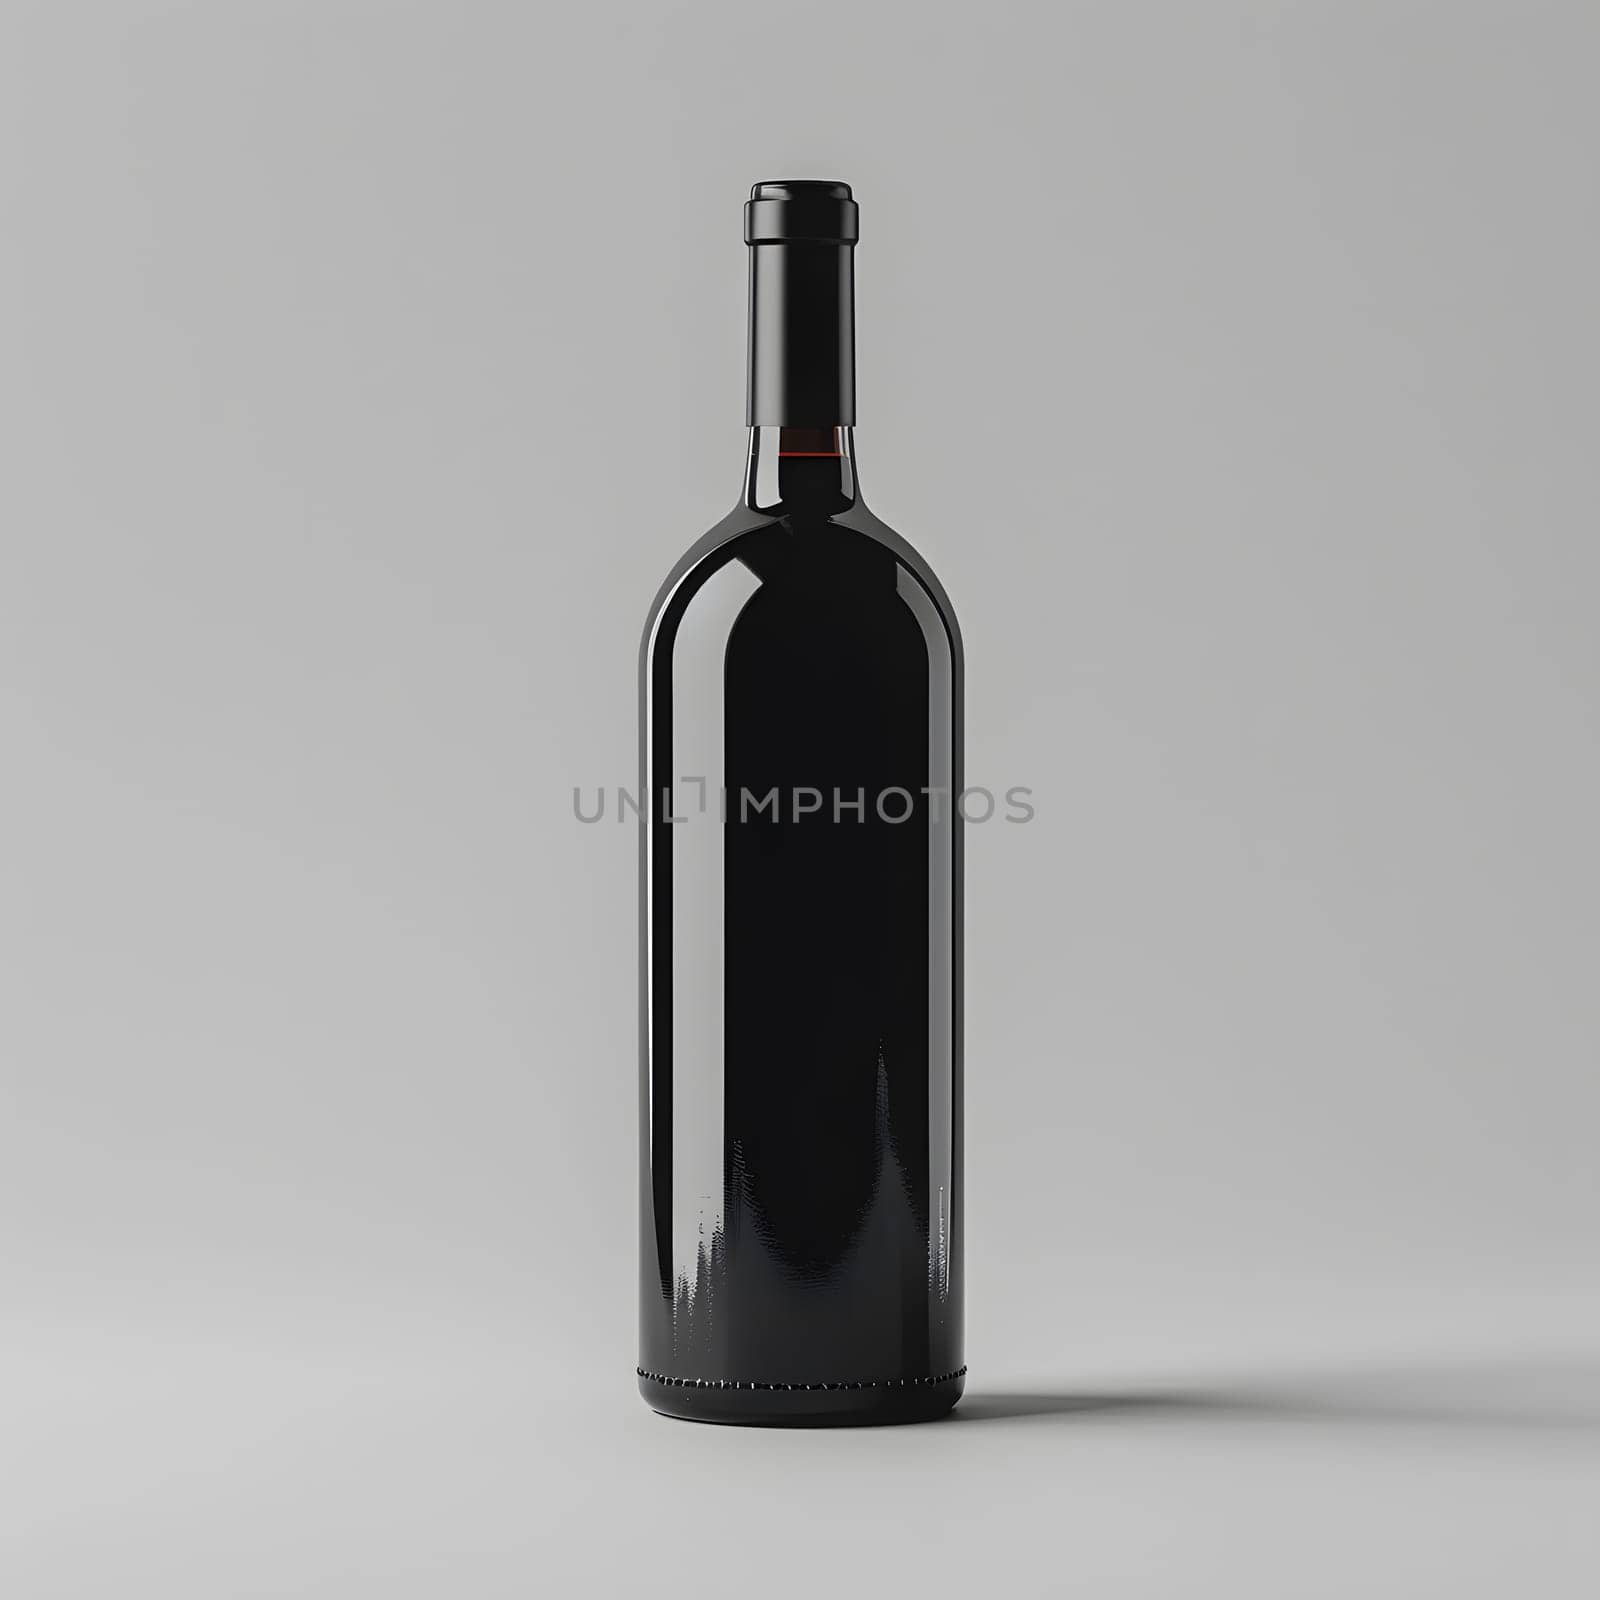 An electric blue wine bottle is resting on a rectangular gray table. The sleek glass cylinder contains liquid, standing out against the neutral surface